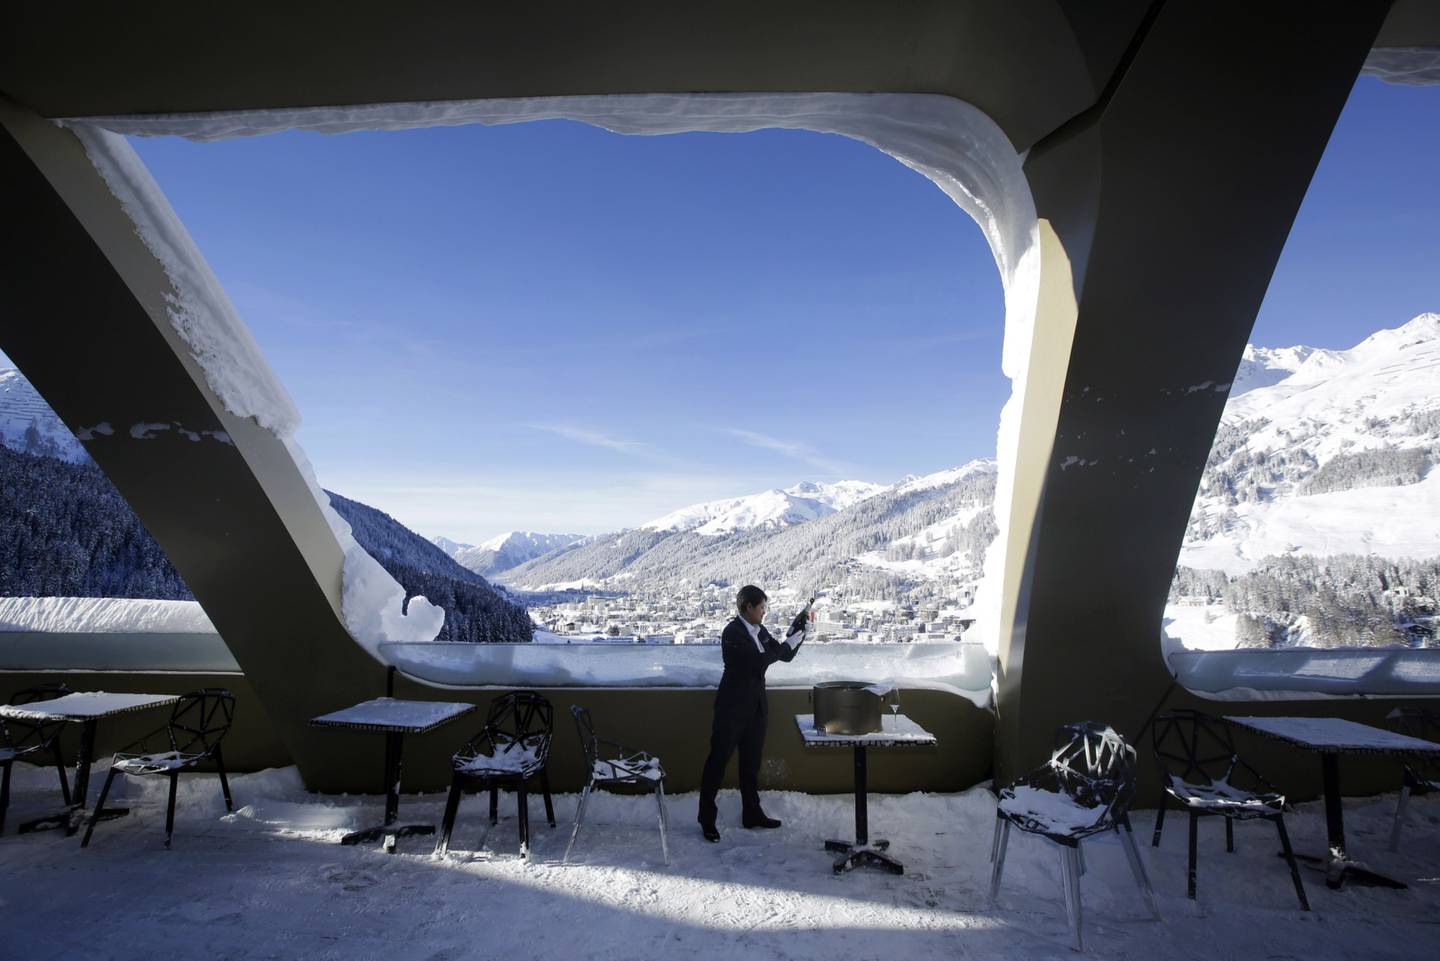 An employee checks a bottle of champagne on the bar terrace of the InterContinental Hotel, Davos 1n 2016.dfd